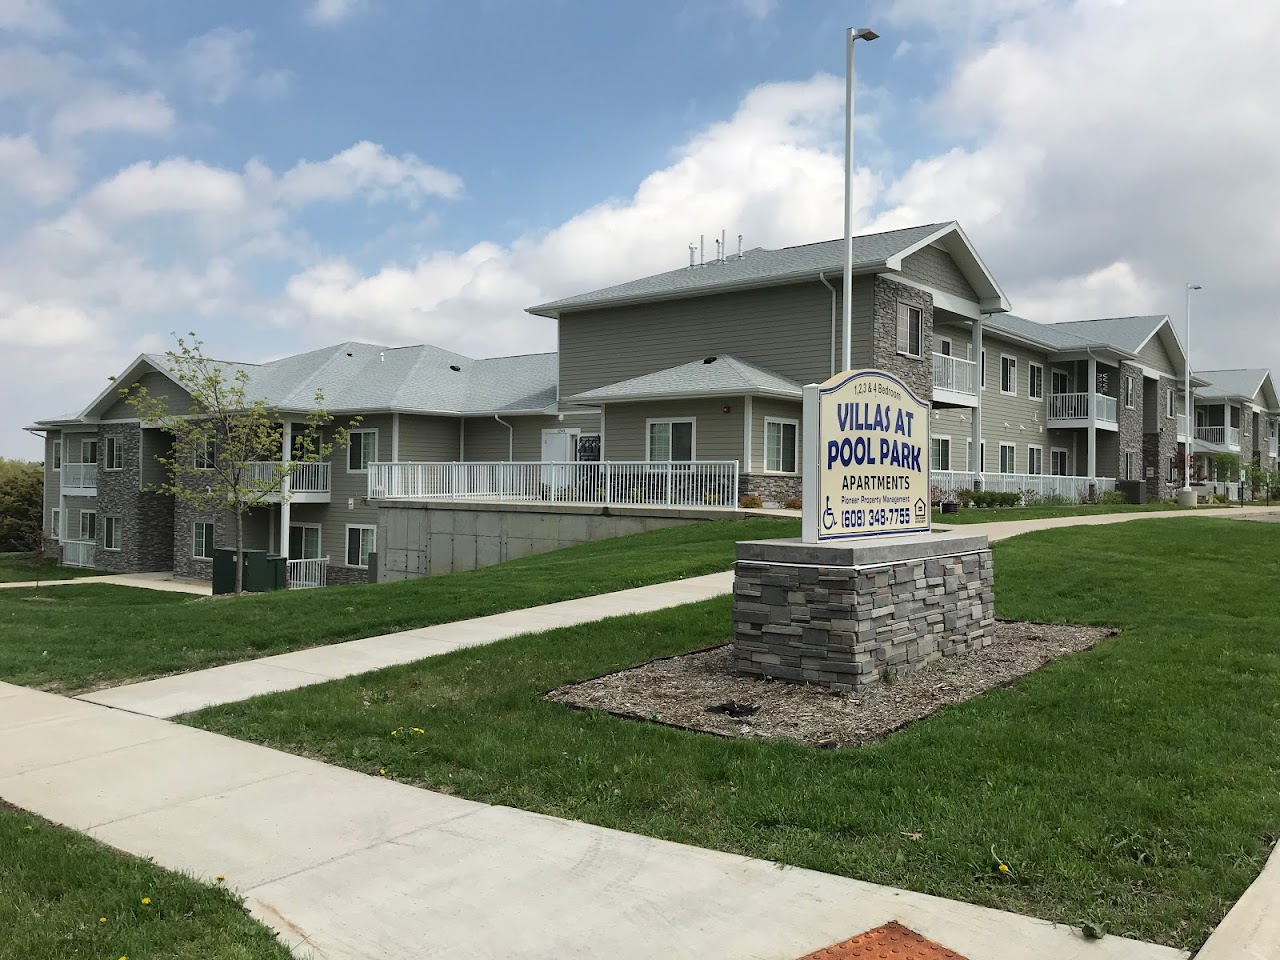 Photo of VILLAS AT POOL PARK. Affordable housing located at 1245 N 4TH ST PLATTEVILLE, WI 53818